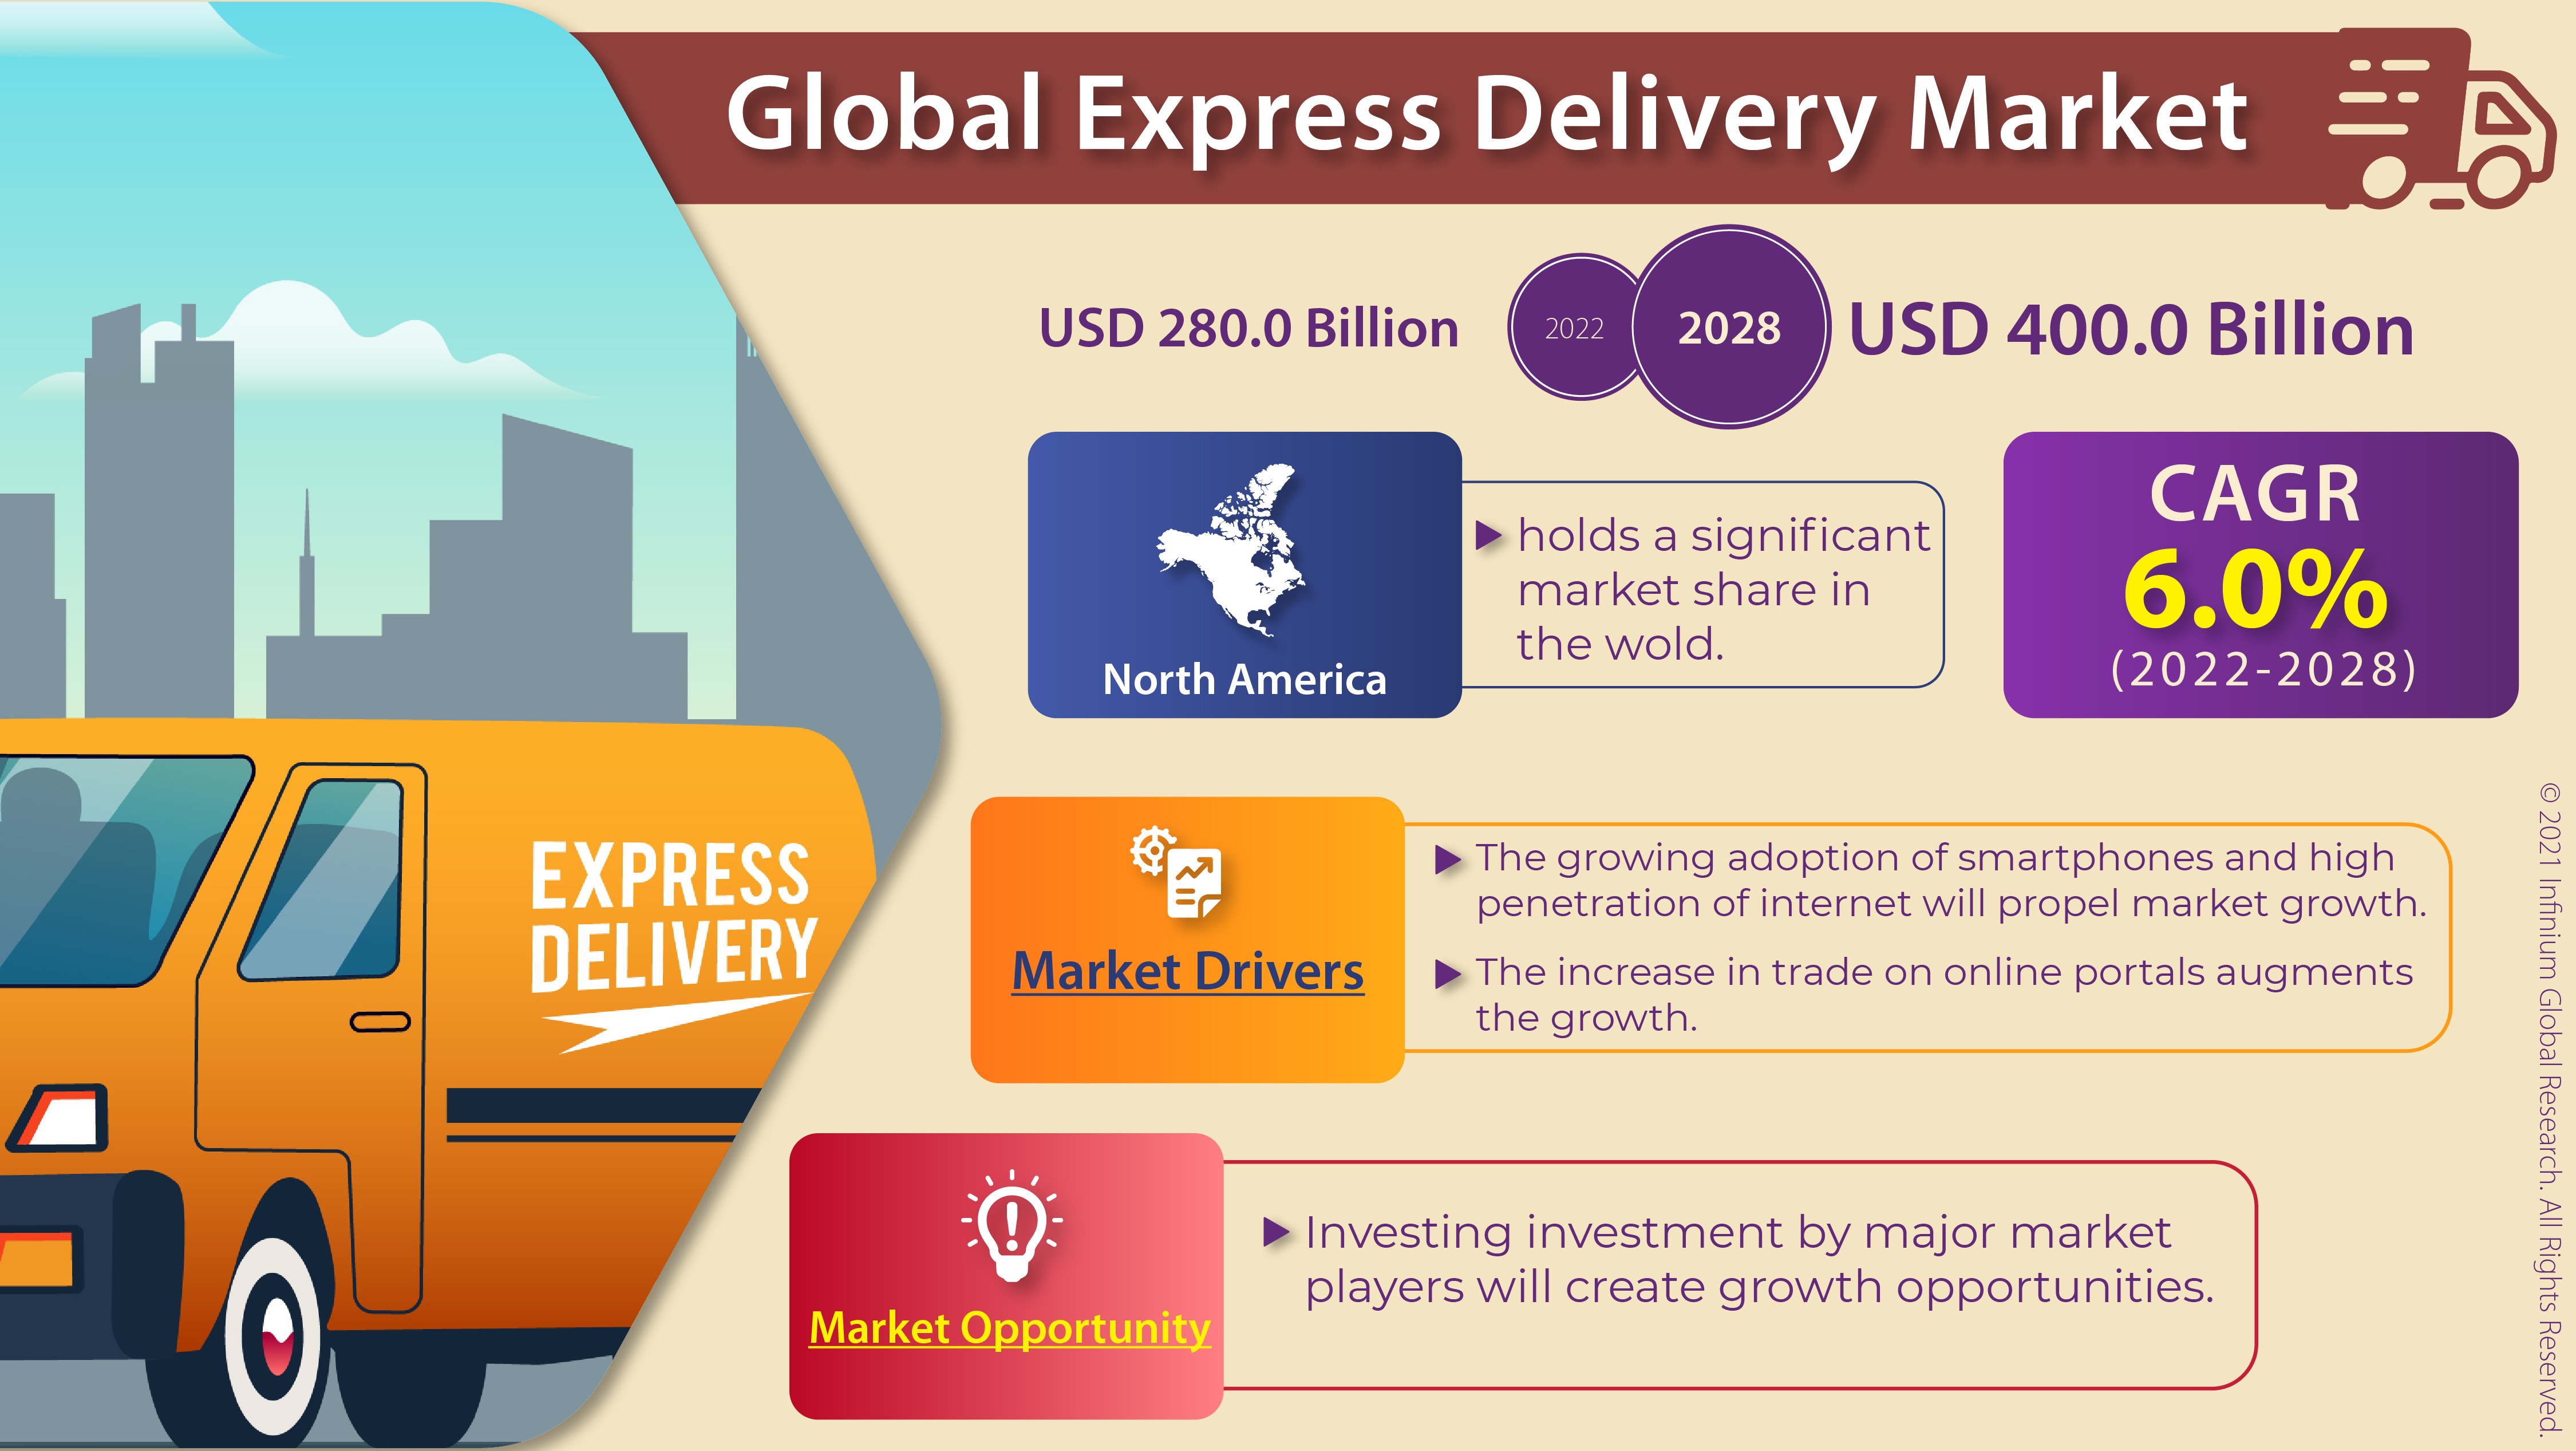 Express Delivery Market